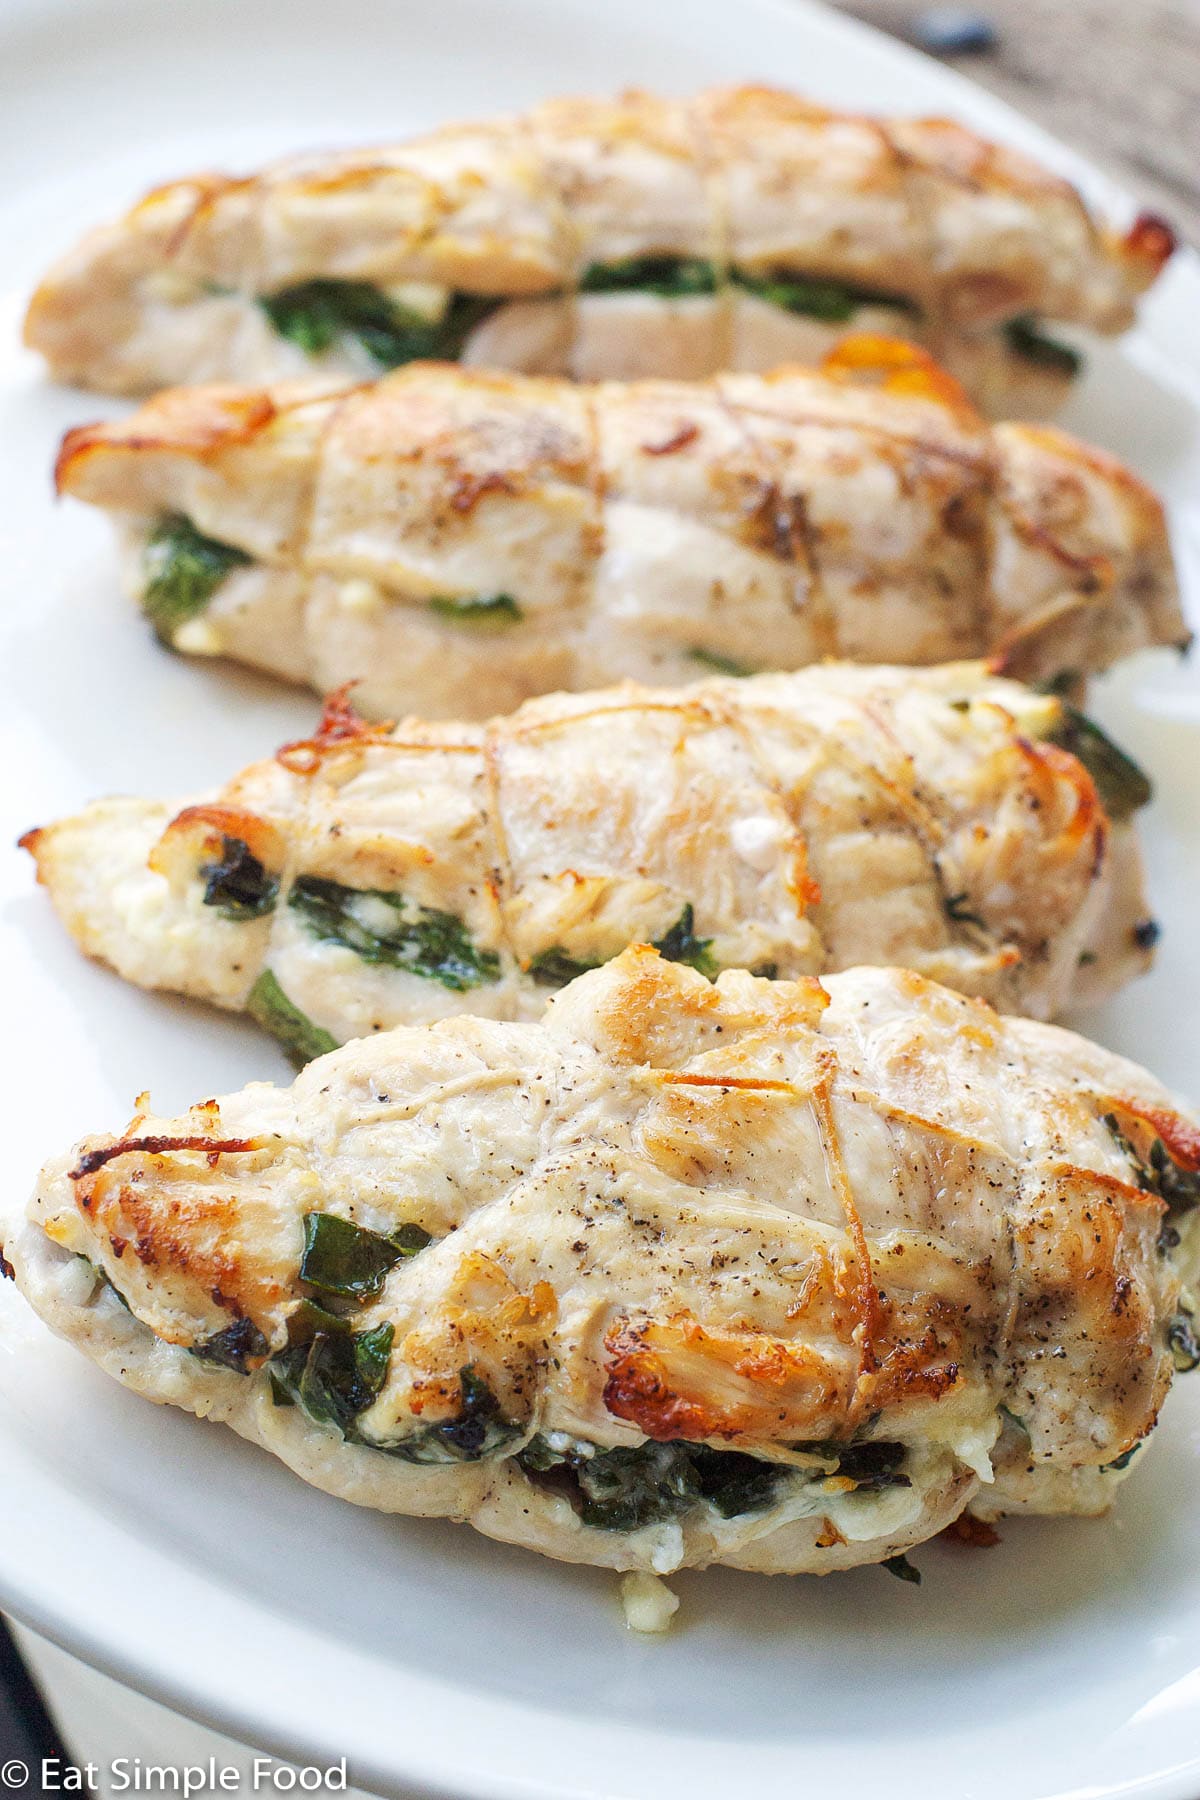 4 Chicken Breasts Stuffed With Feta and Spinach On A White Plate. Vertical view.